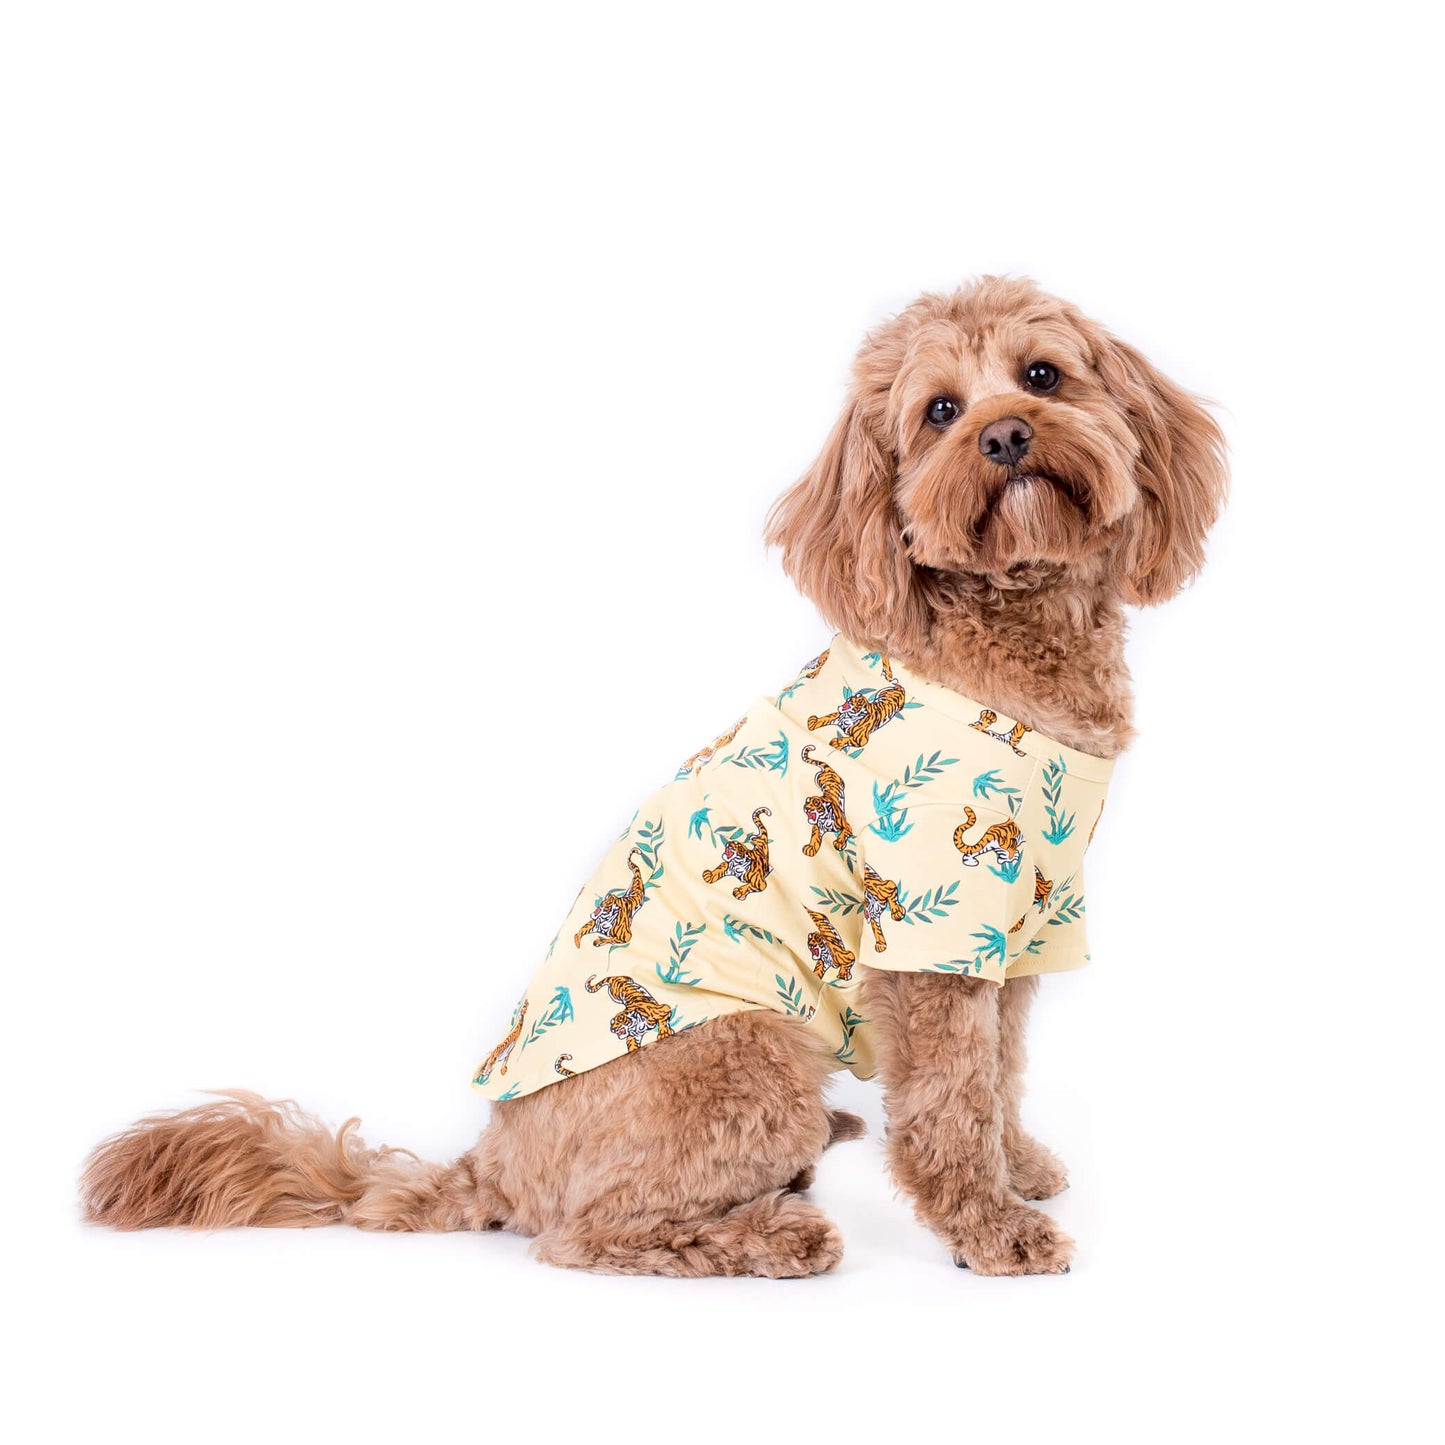 Adorable Cavoodle in a Wild Child dog shirt by Vibrant Hound - Yellow shirt with orange tiger prints